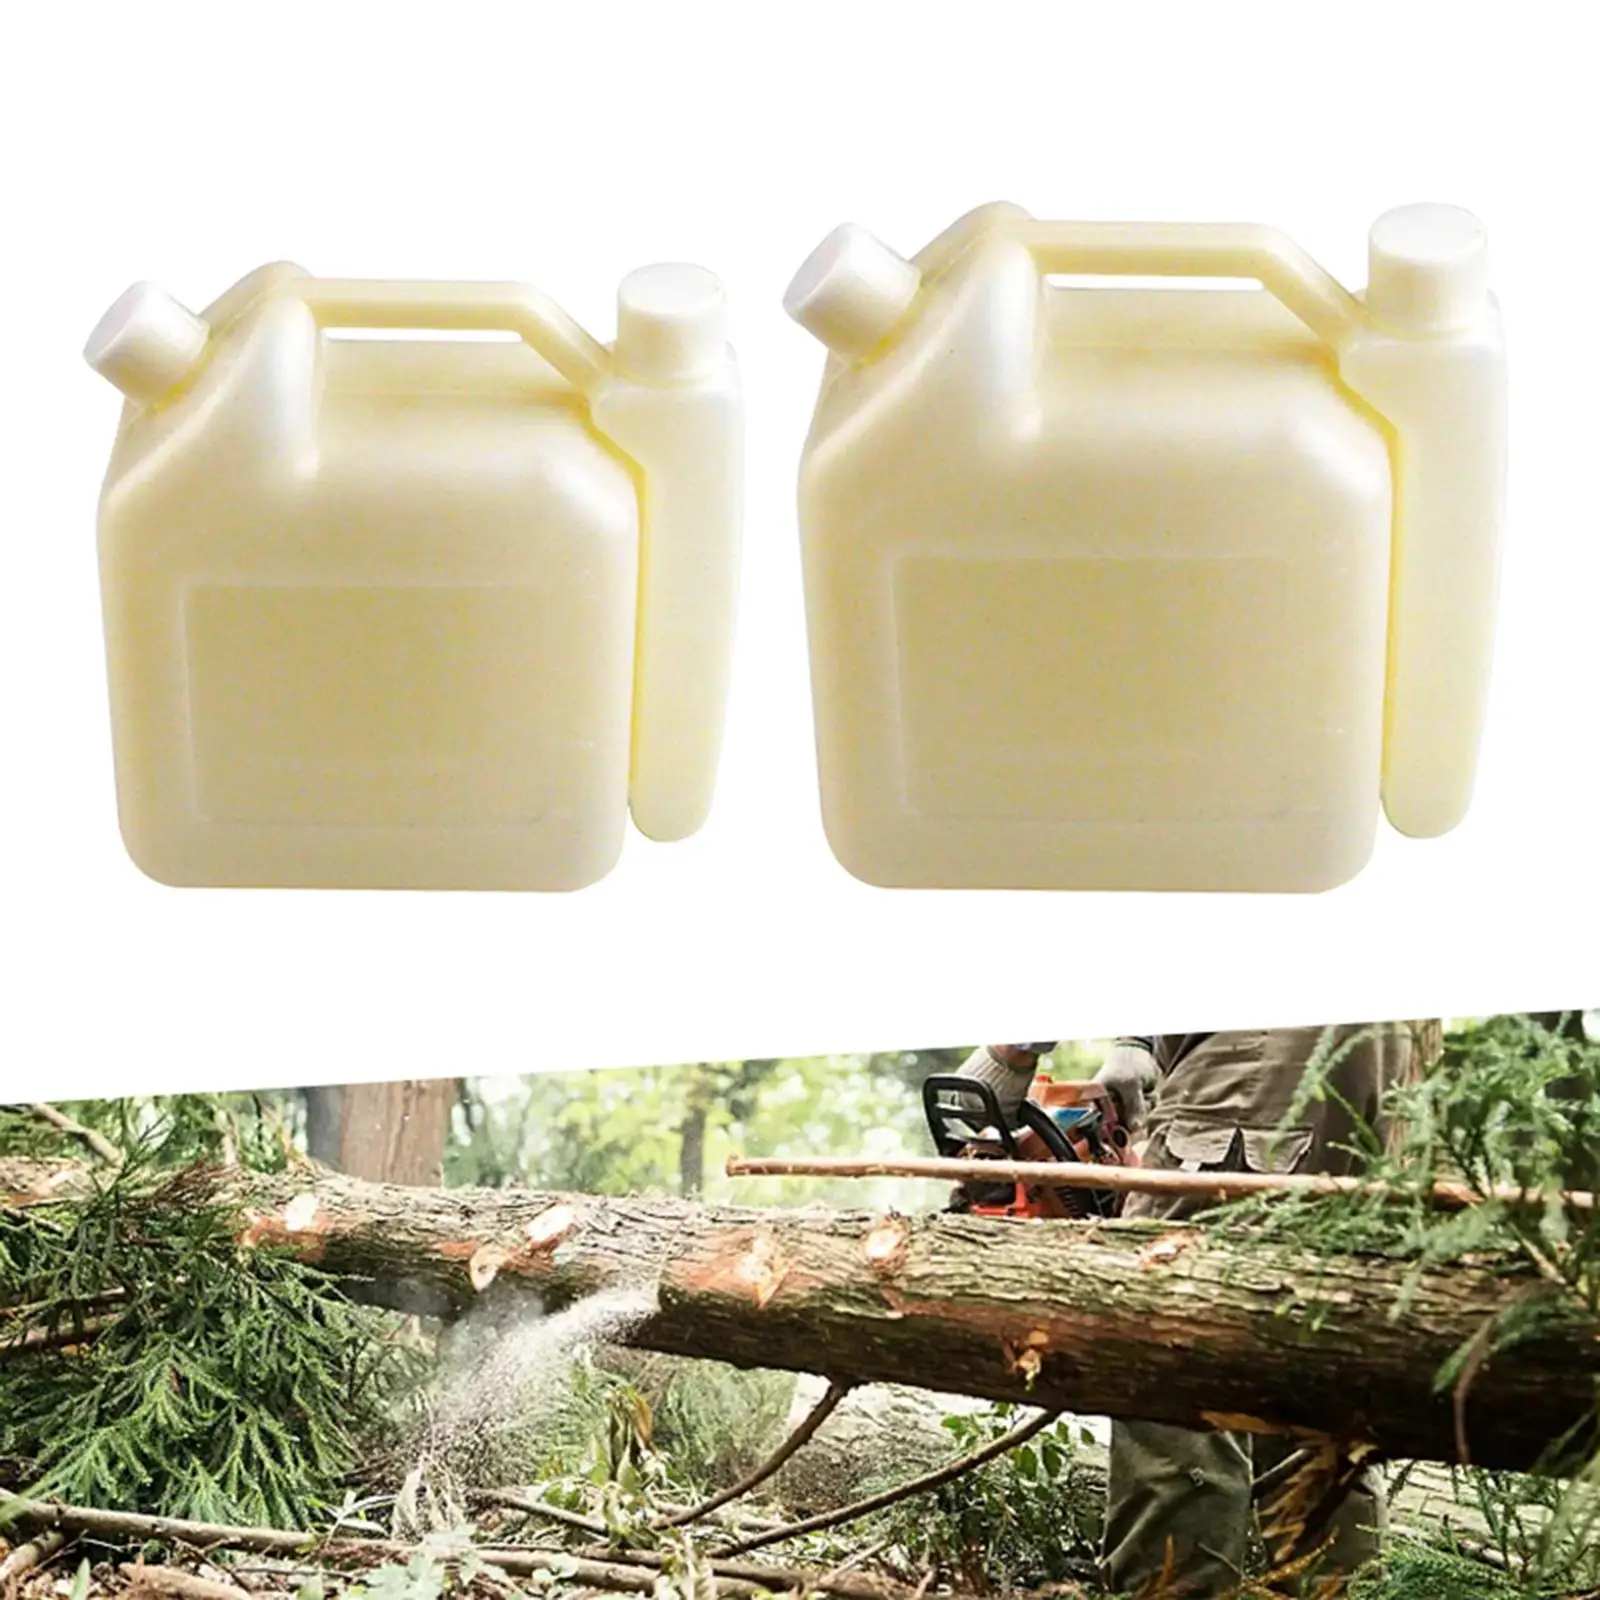 Chainsaws Gasoline Fuel Mixing Bottle 25:1 50:1 Big Capacity Universal Fuel Tank for Trimmer Brushcutters Lawn Mowers Parts